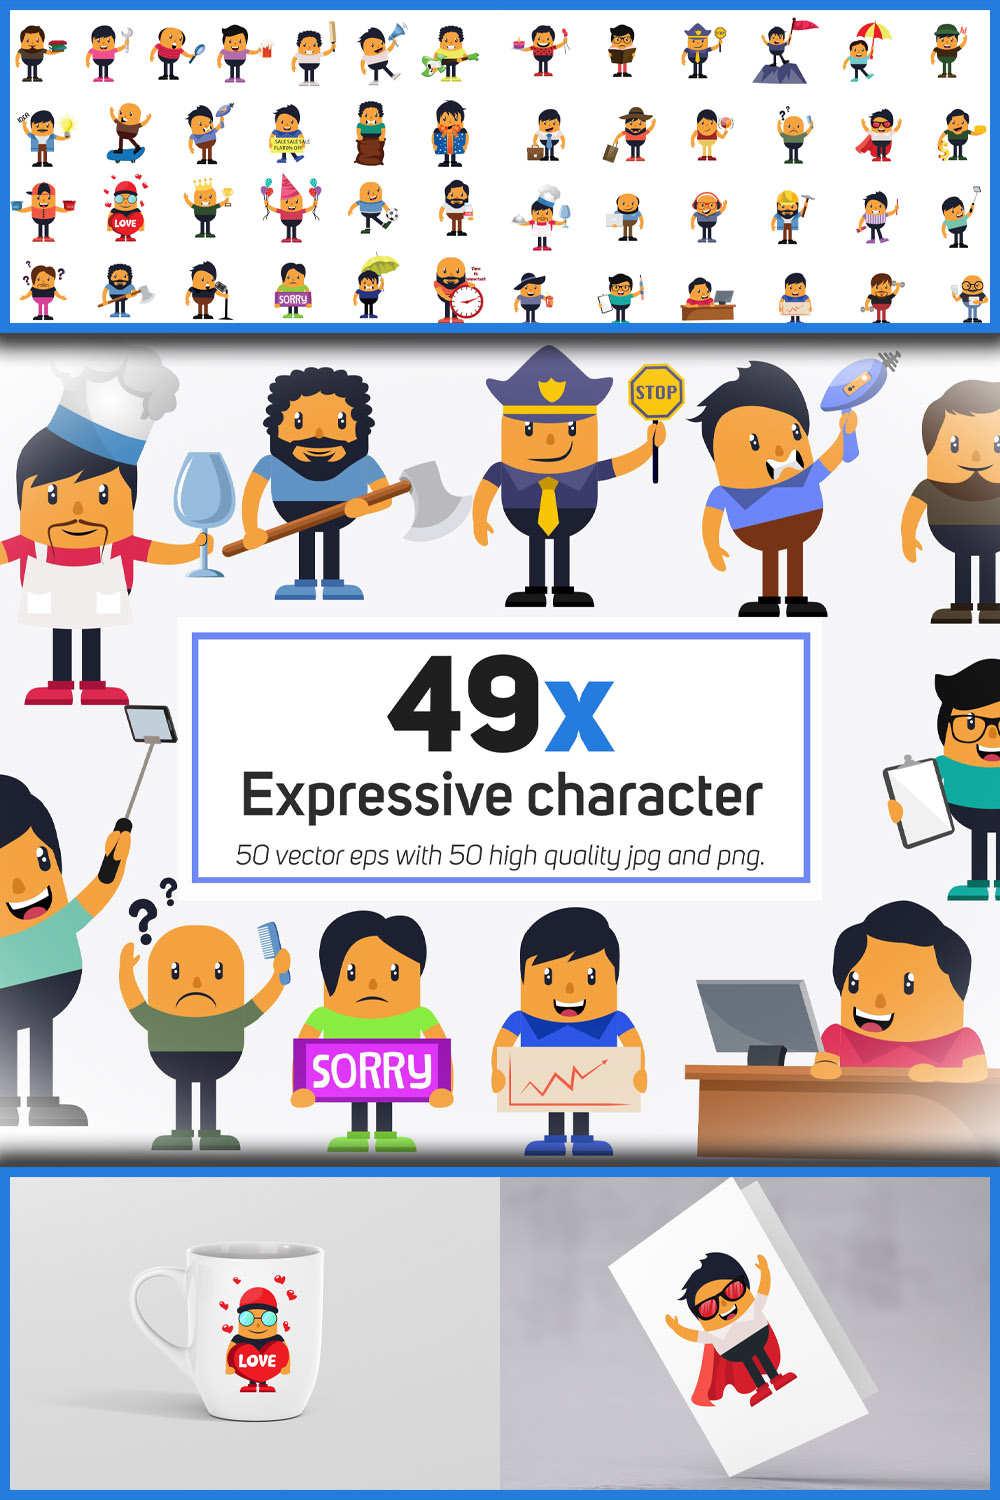 Expressive character collection illustration of pinterest.